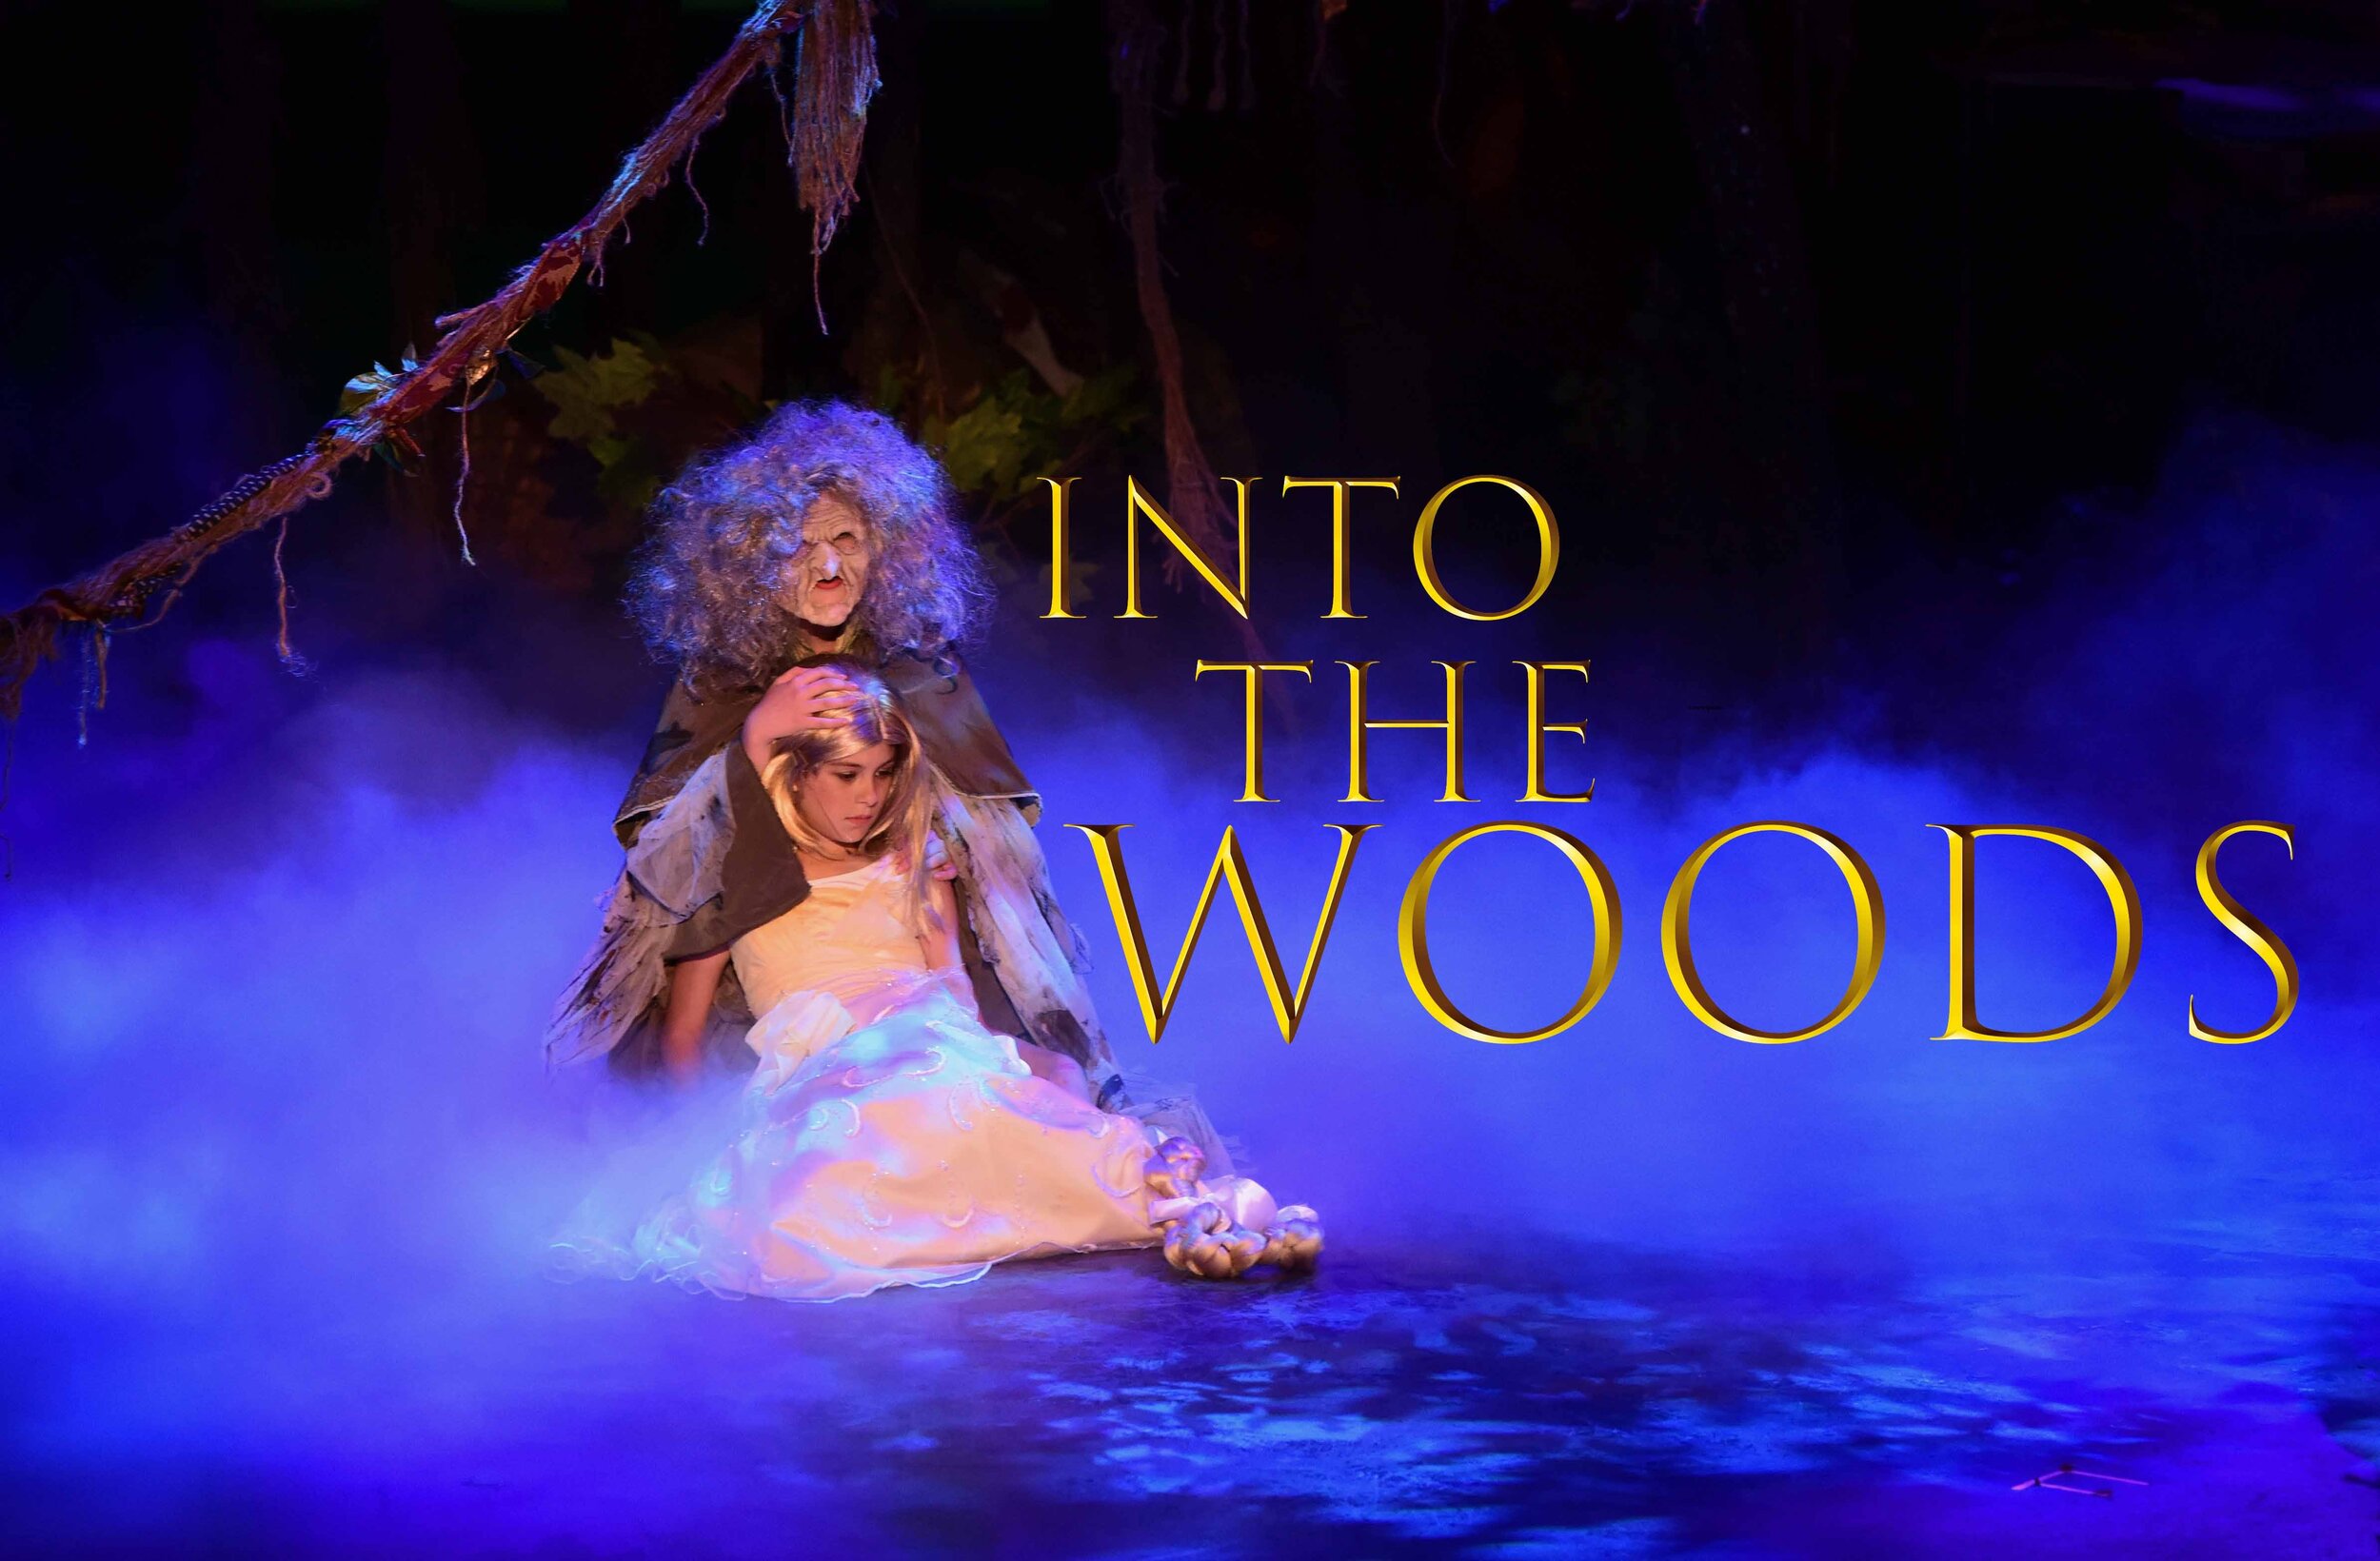 Into the woods cover.jpg